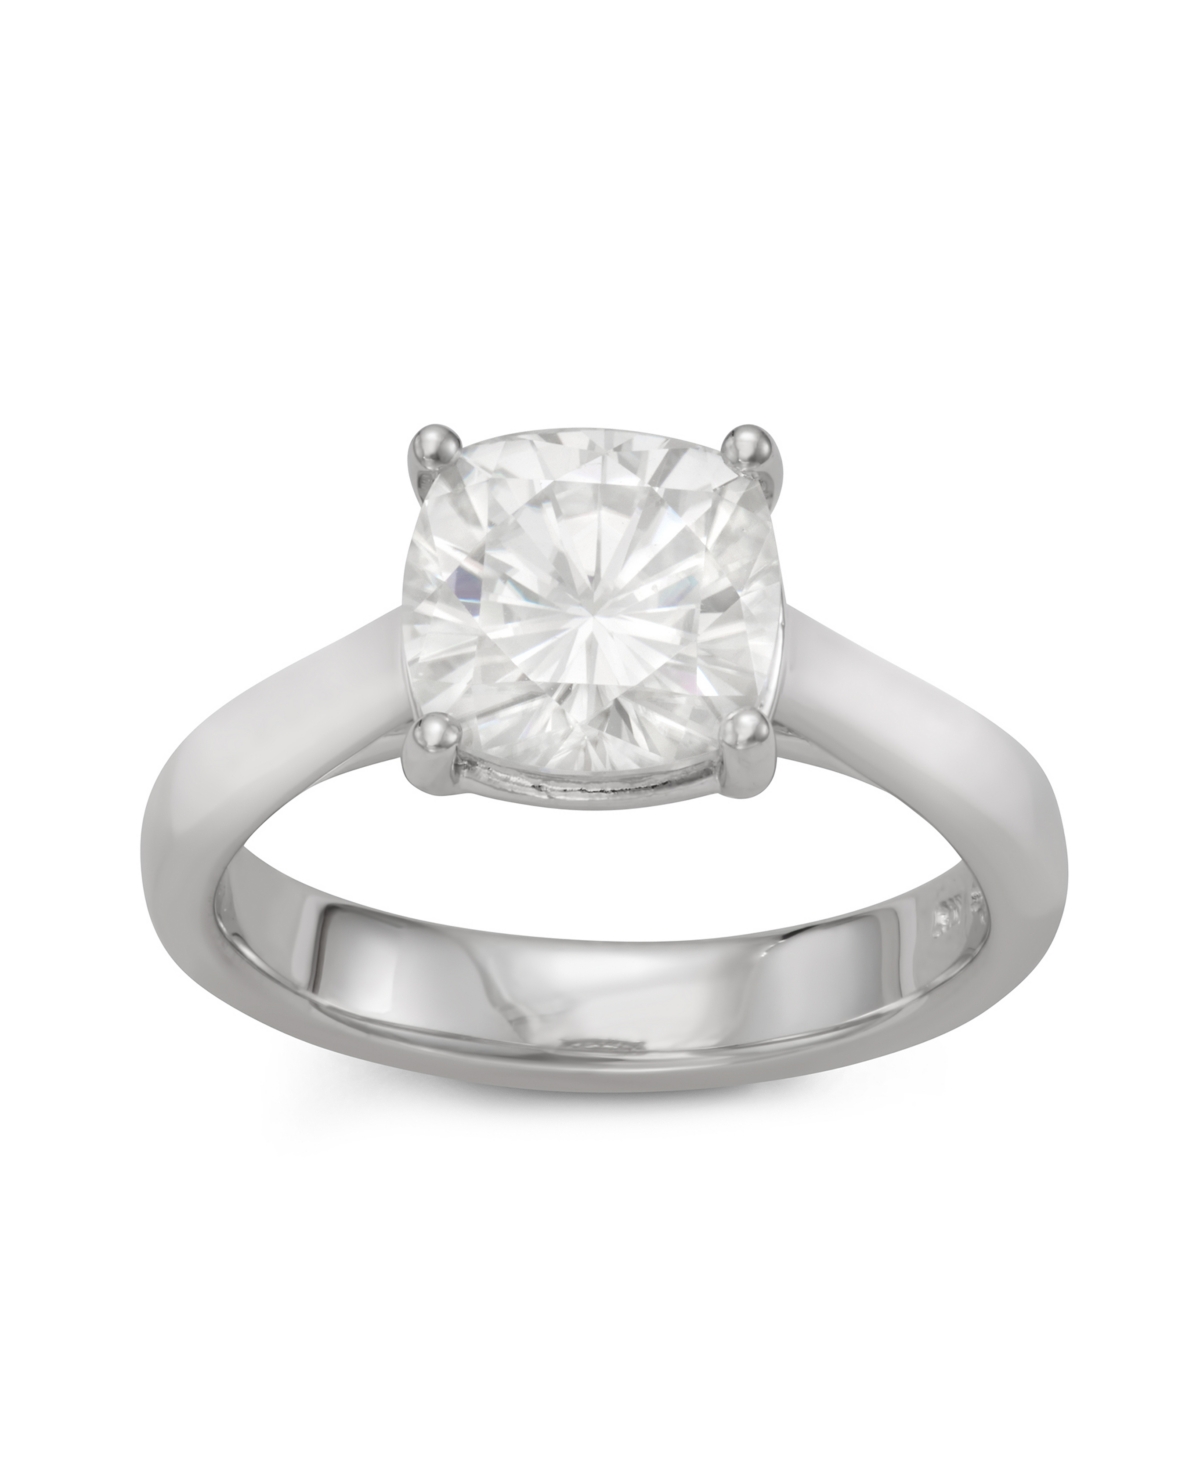 Moissanite Cushion Cut Solitaire Ring (2 3/4 ct. t.w. Diamond Equivalent) in Sterling Silver - Sterling Silver